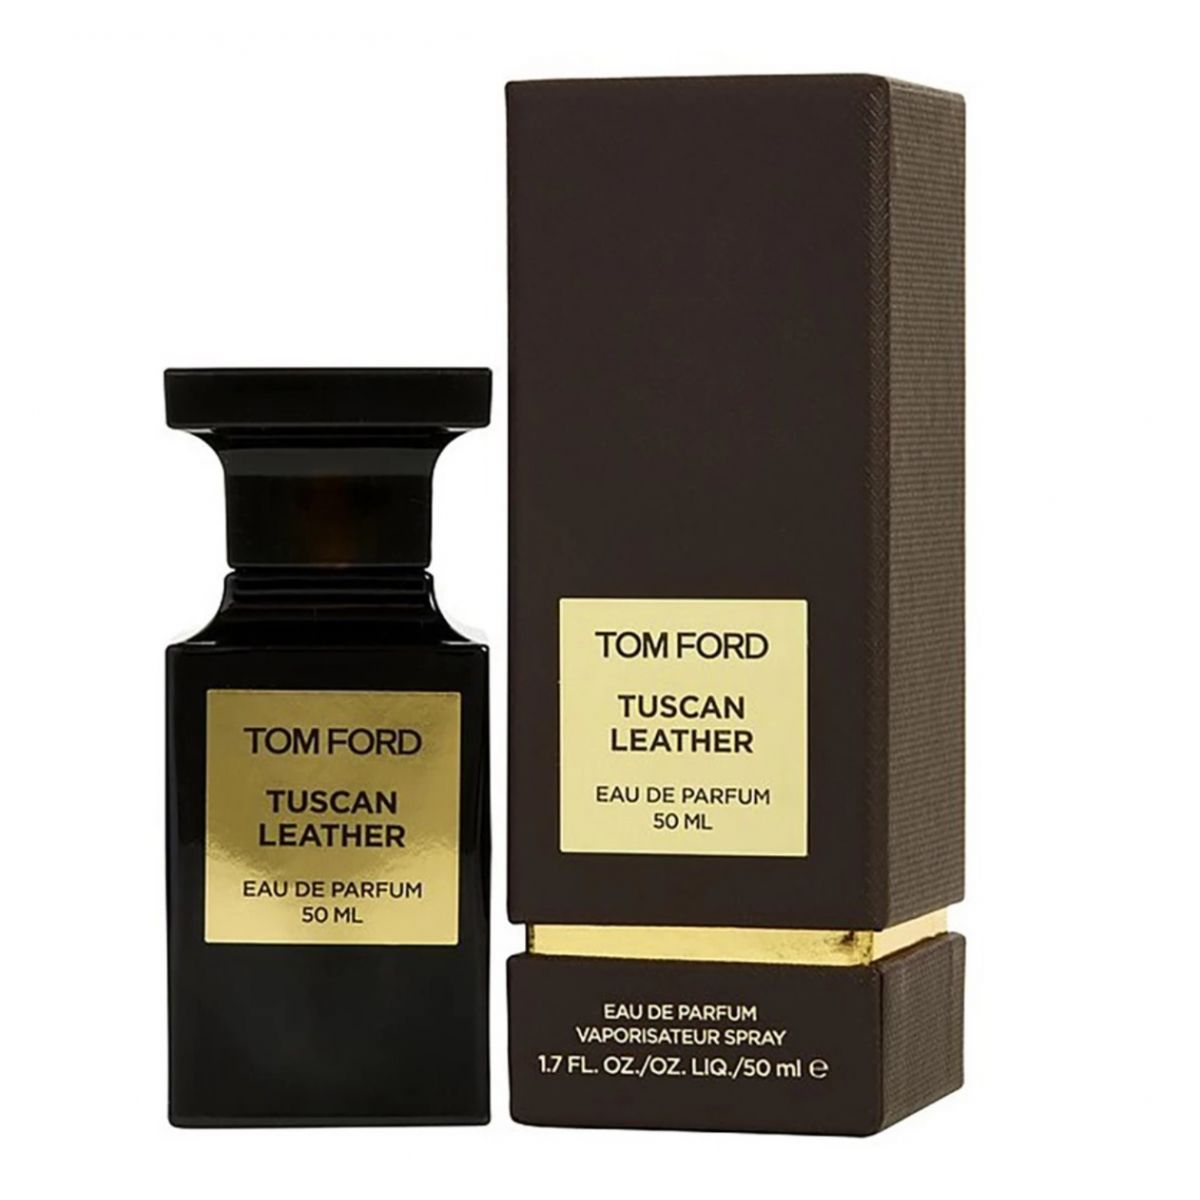 Tom Ford Tuscan Leather For Men And Women Eau De Parfum 50Ml